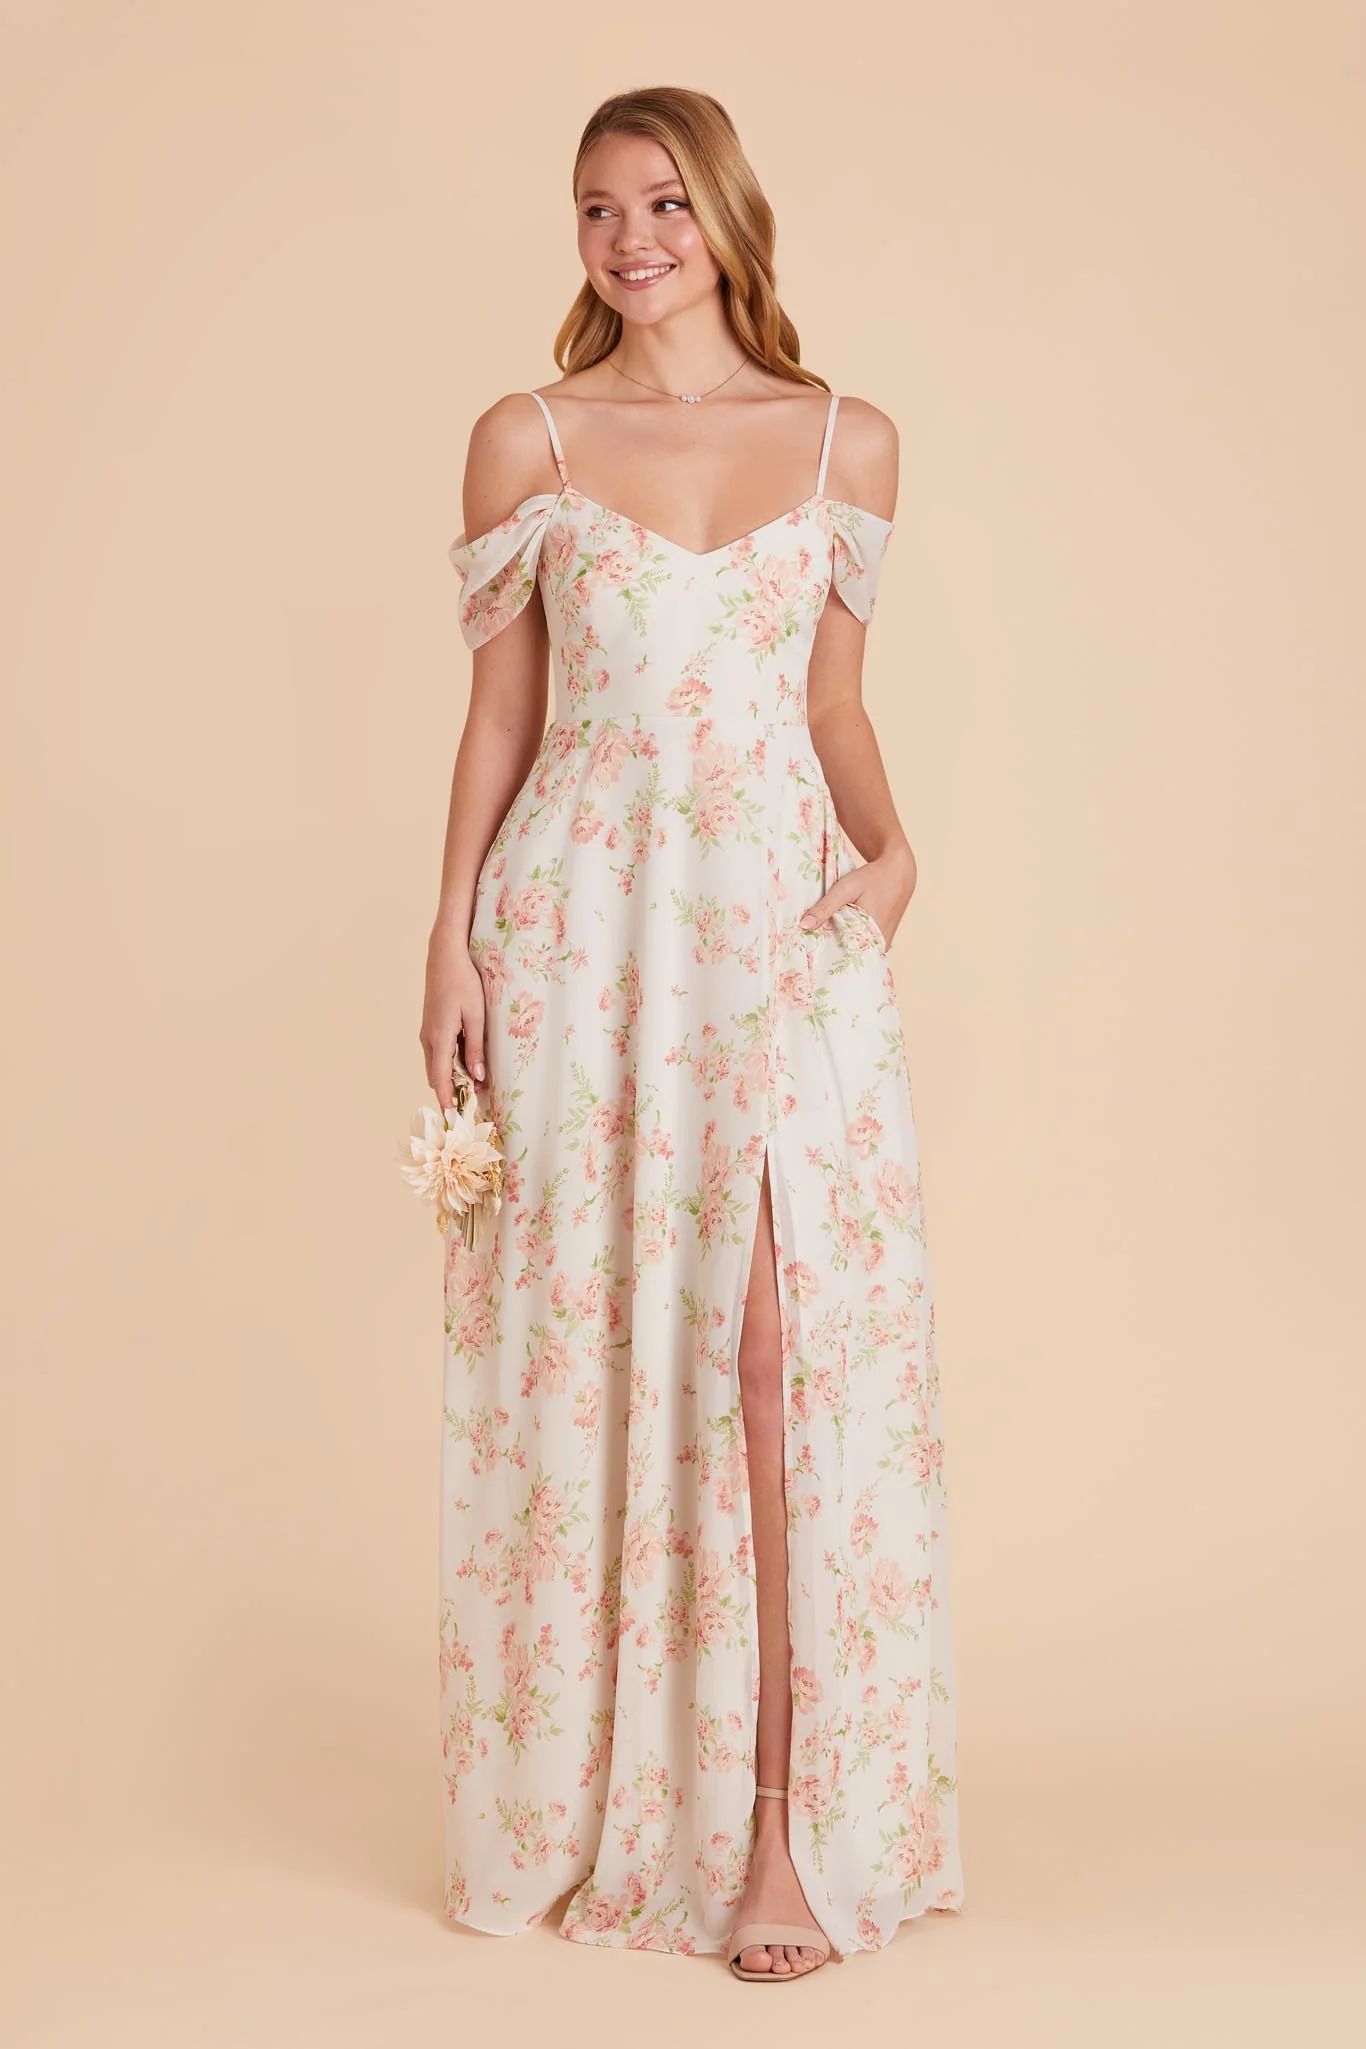 Devin Convertible Dress - Whimsical Blooms | Birdy Grey